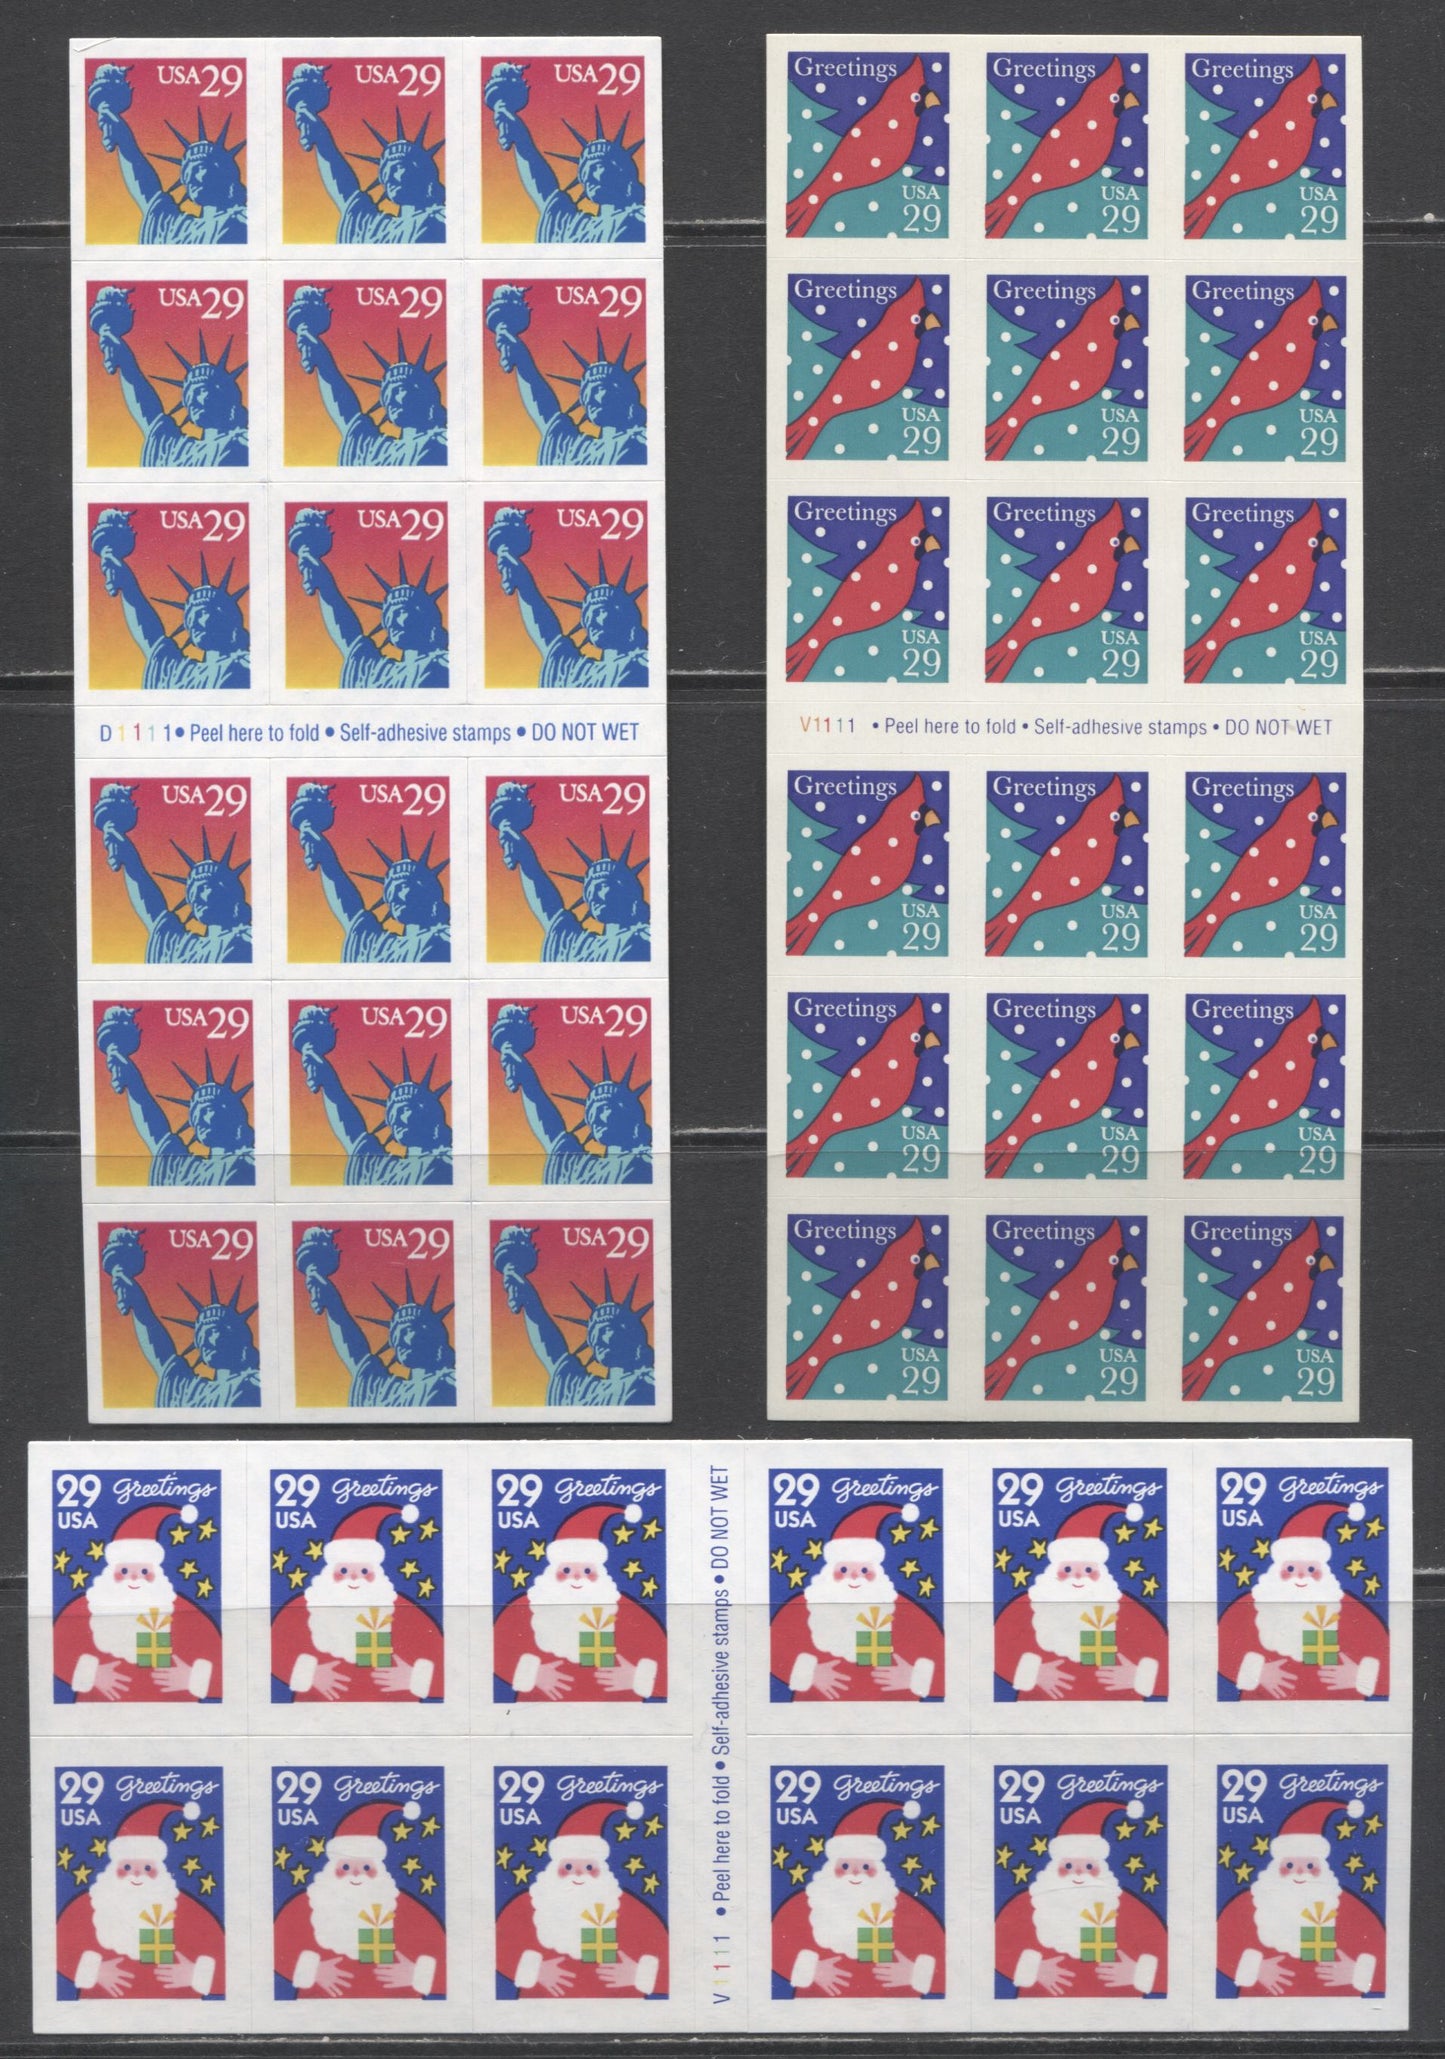 Lot 92 United States SC#2599a/2874a 1992-1994 Statue Of Liberty - Christmas Issues, 2 VFNH Blocks Of 18, Click on Listing to See ALL Pictures, 2017 Scott Cat. $22